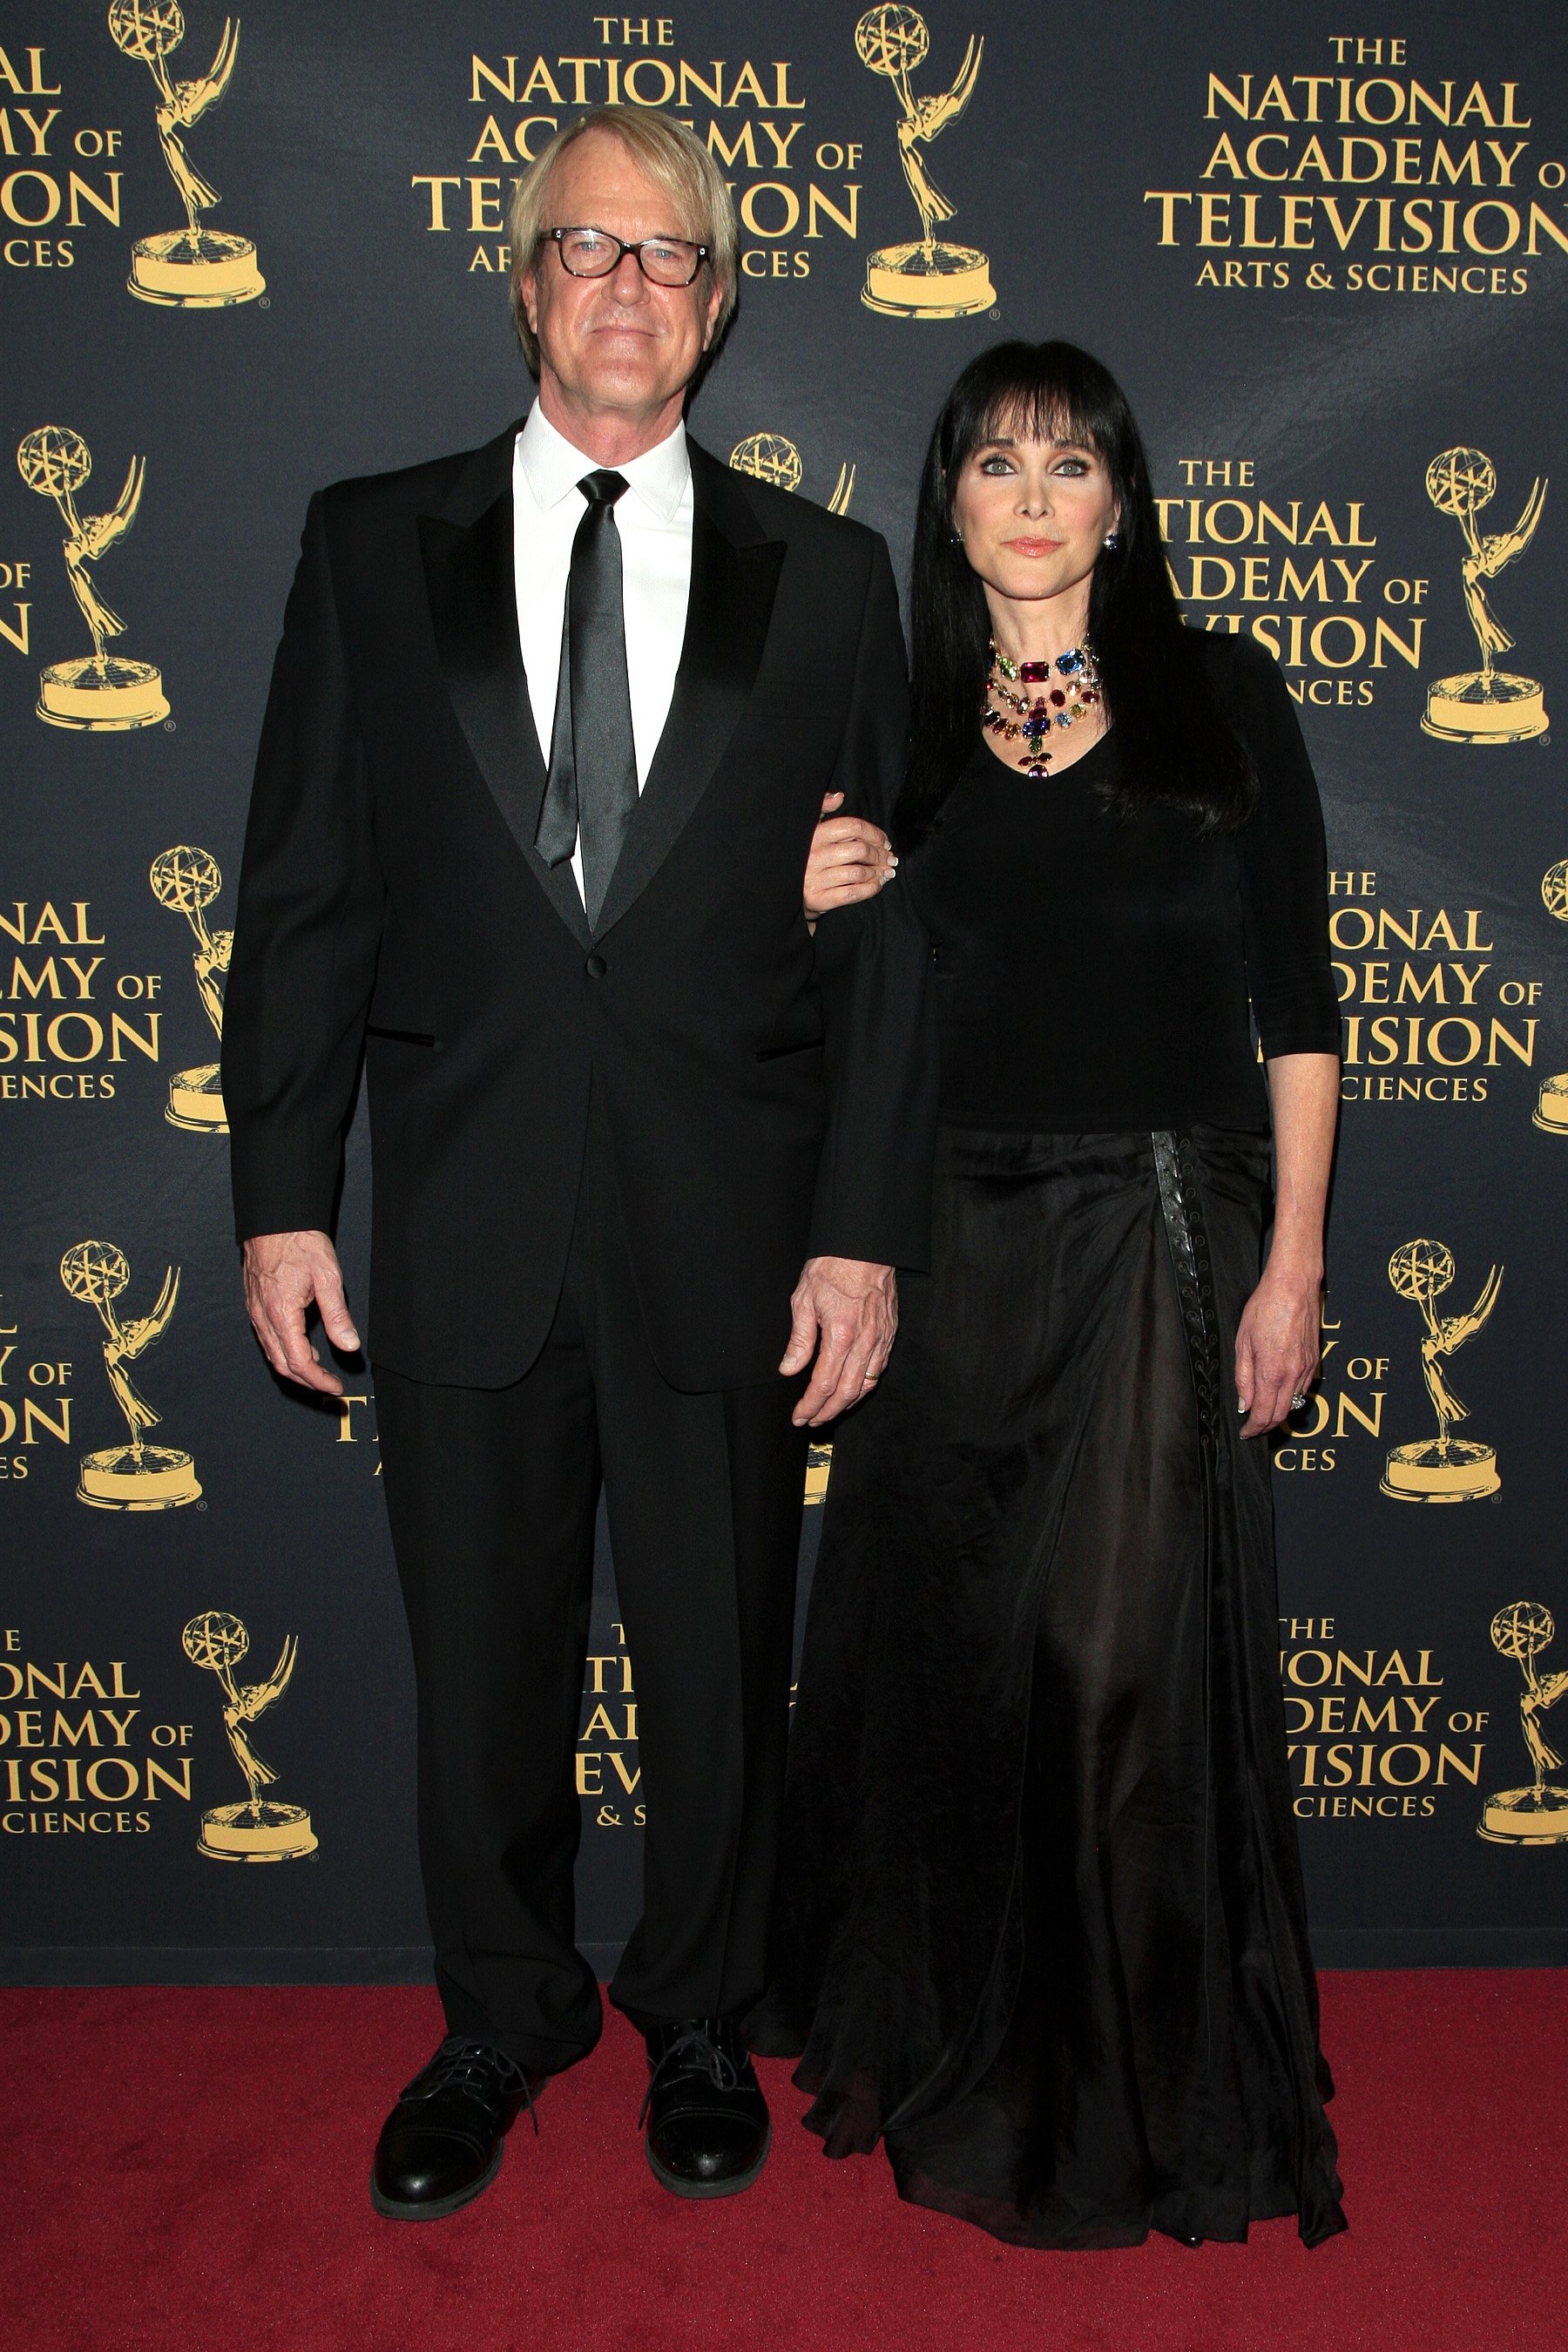 John Tesh and Connie Selleca attend The 42nd Daytime Creative Arts Emmy Awards Gala on April 24, 2015, in Los Angeles, California. | Source: Shutterstock.